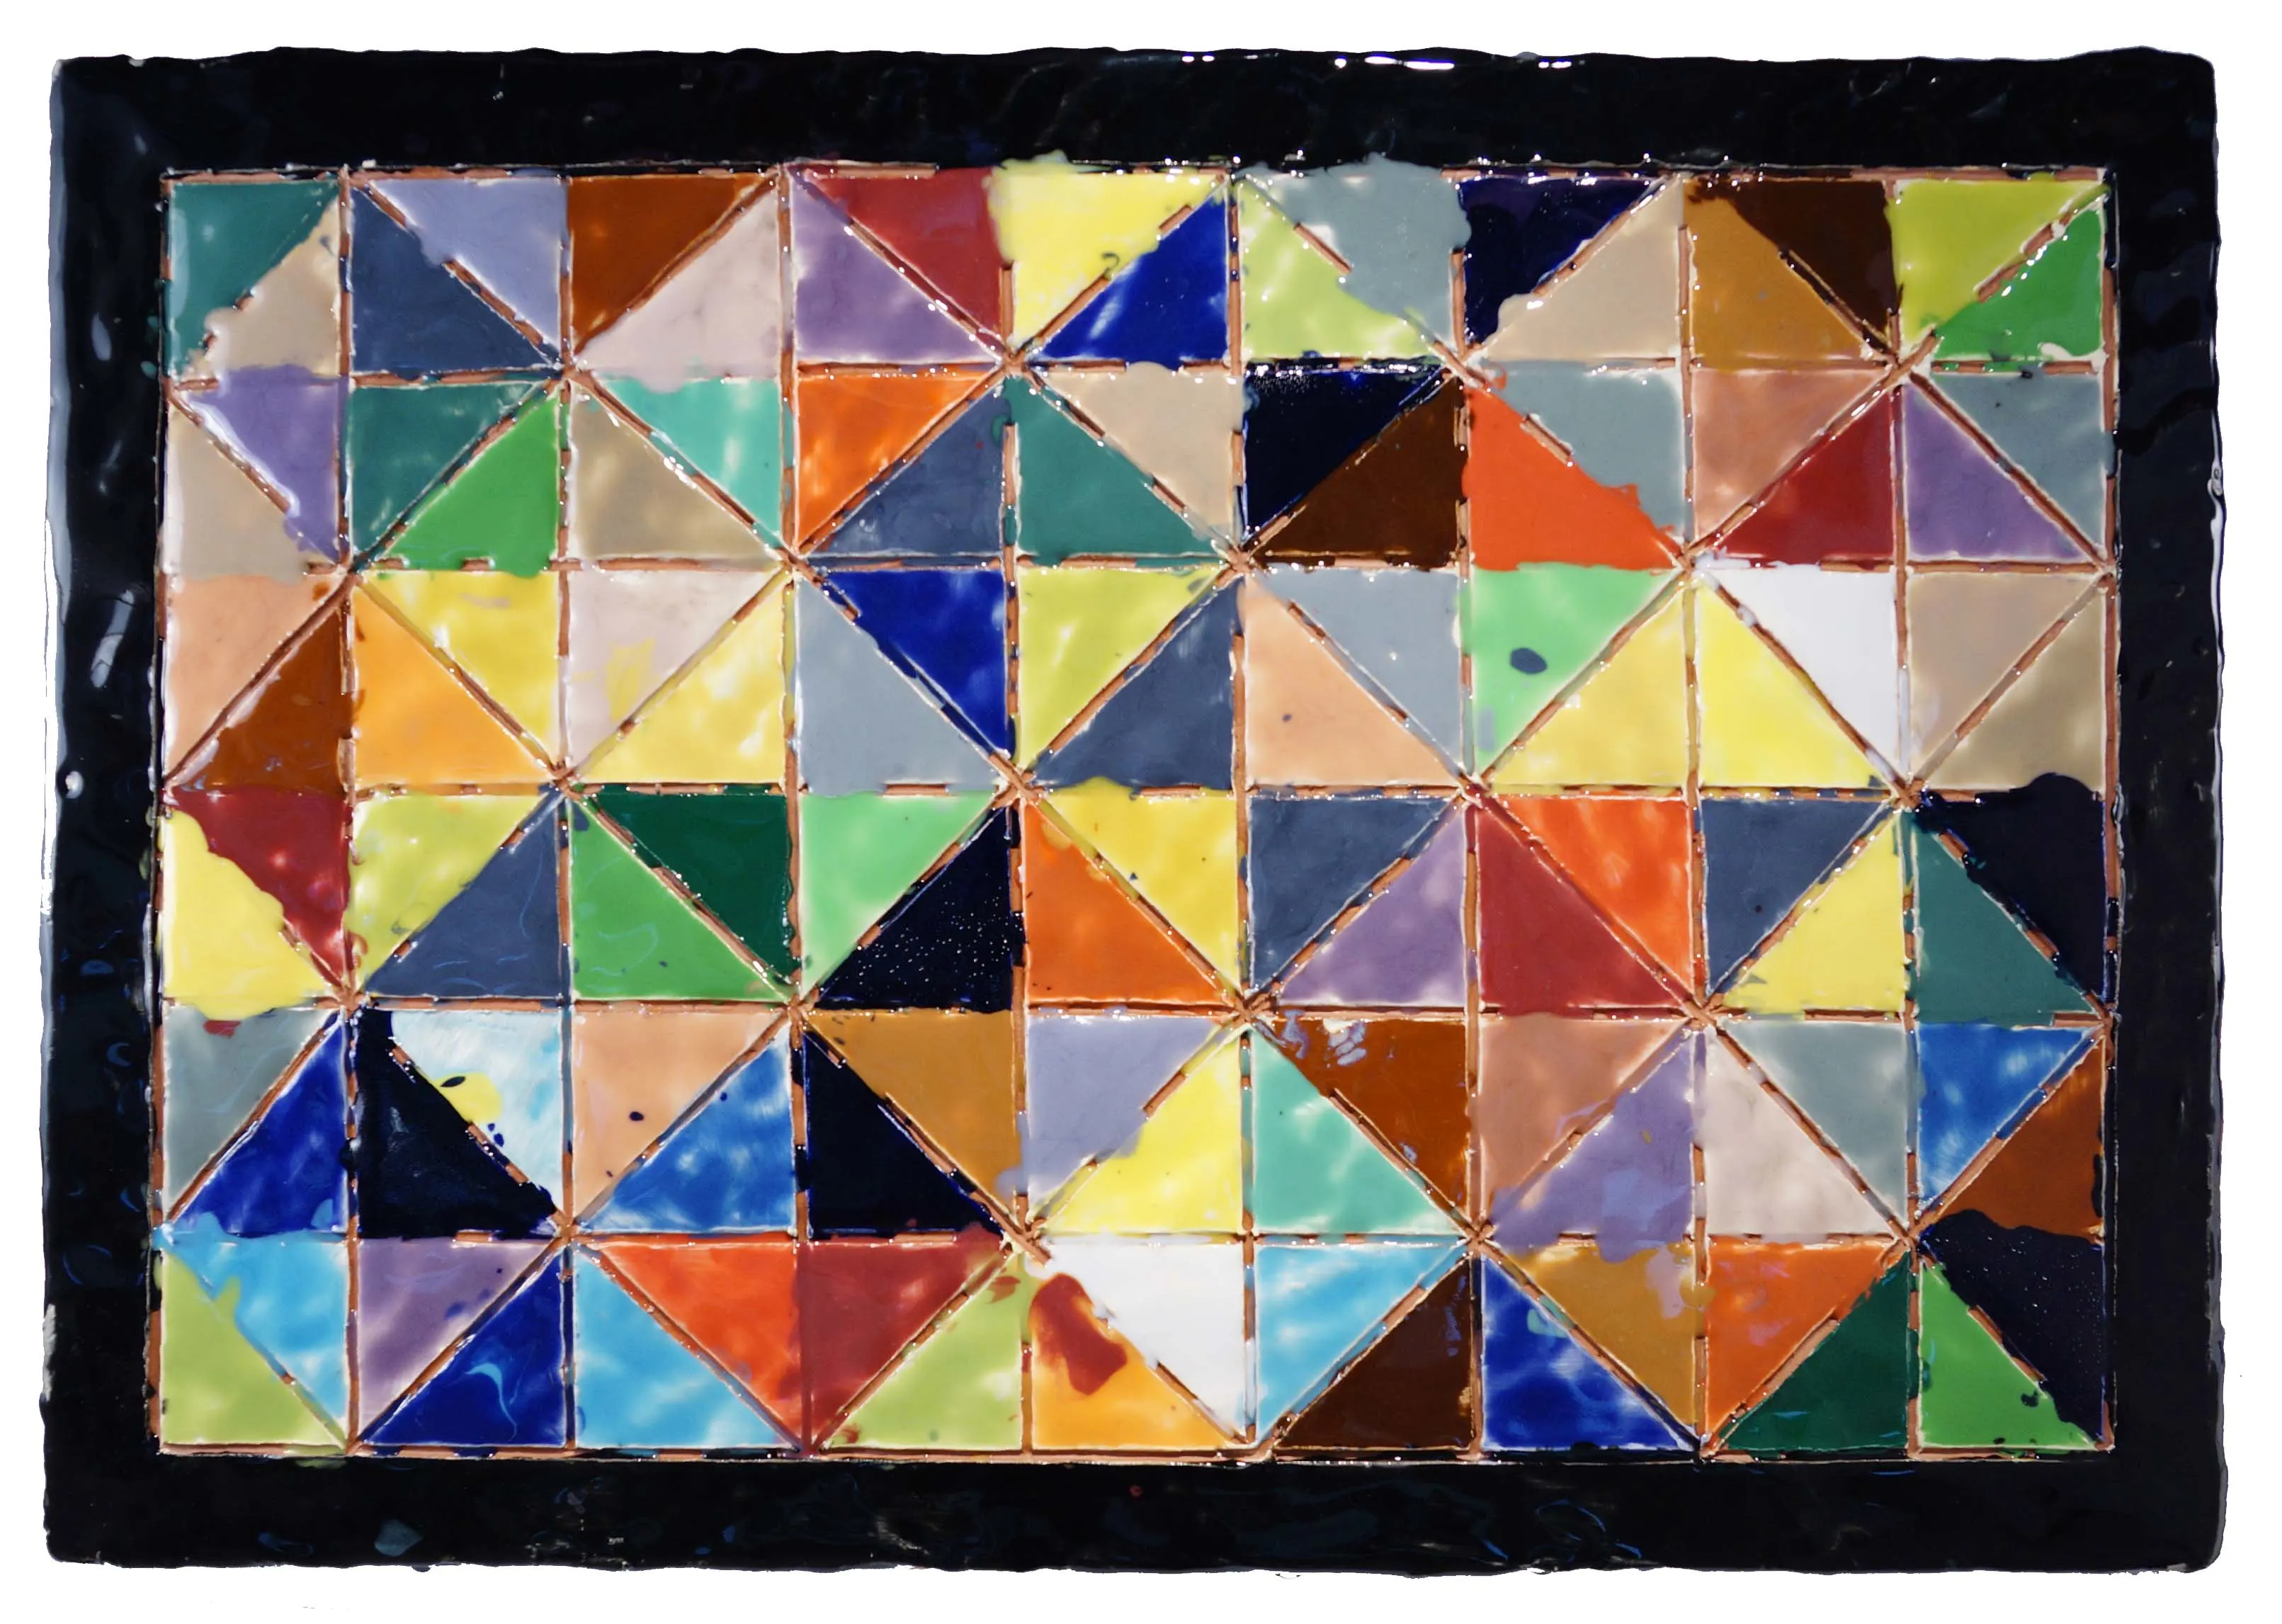 About the Artwork Polly Apfelbaum. Abstract Pennsylvania Diamond Quilt, 2021. Terracotta and Glaze. 49.3 X 71 X 2 Cm  by Polly Apfelbaum